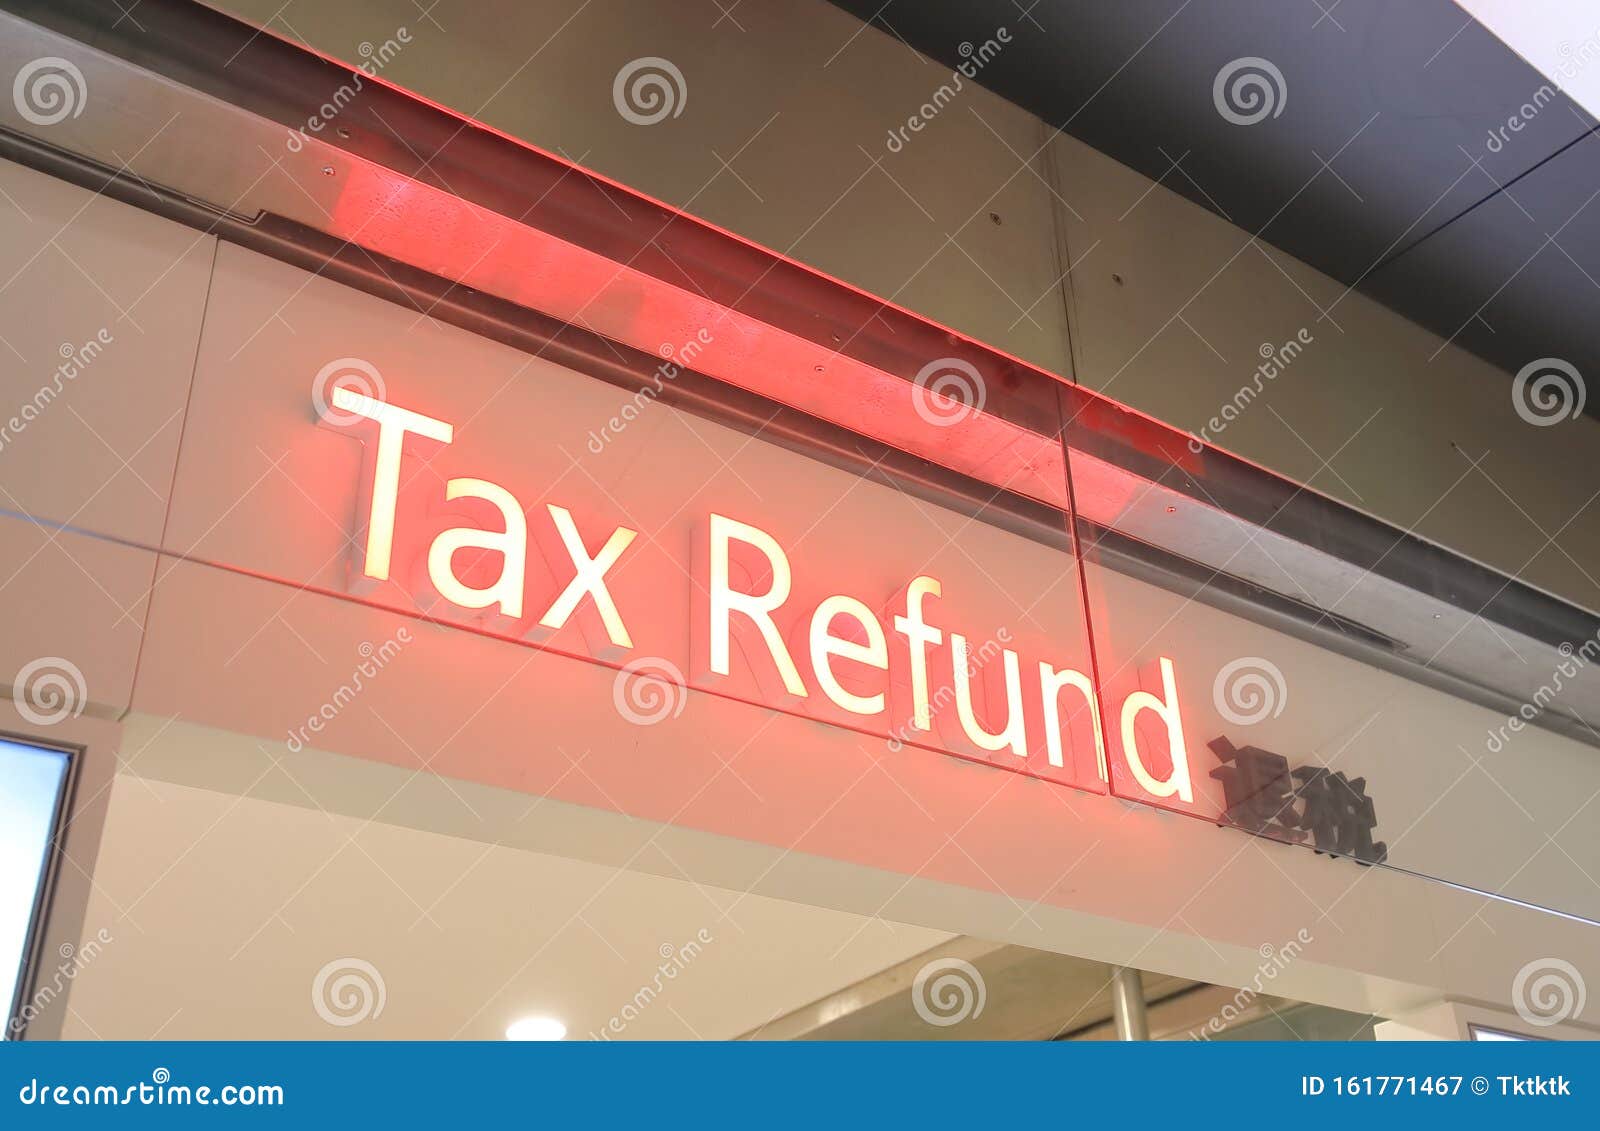 tax-refund-sign-airport-stock-image-image-of-shopping-161771467